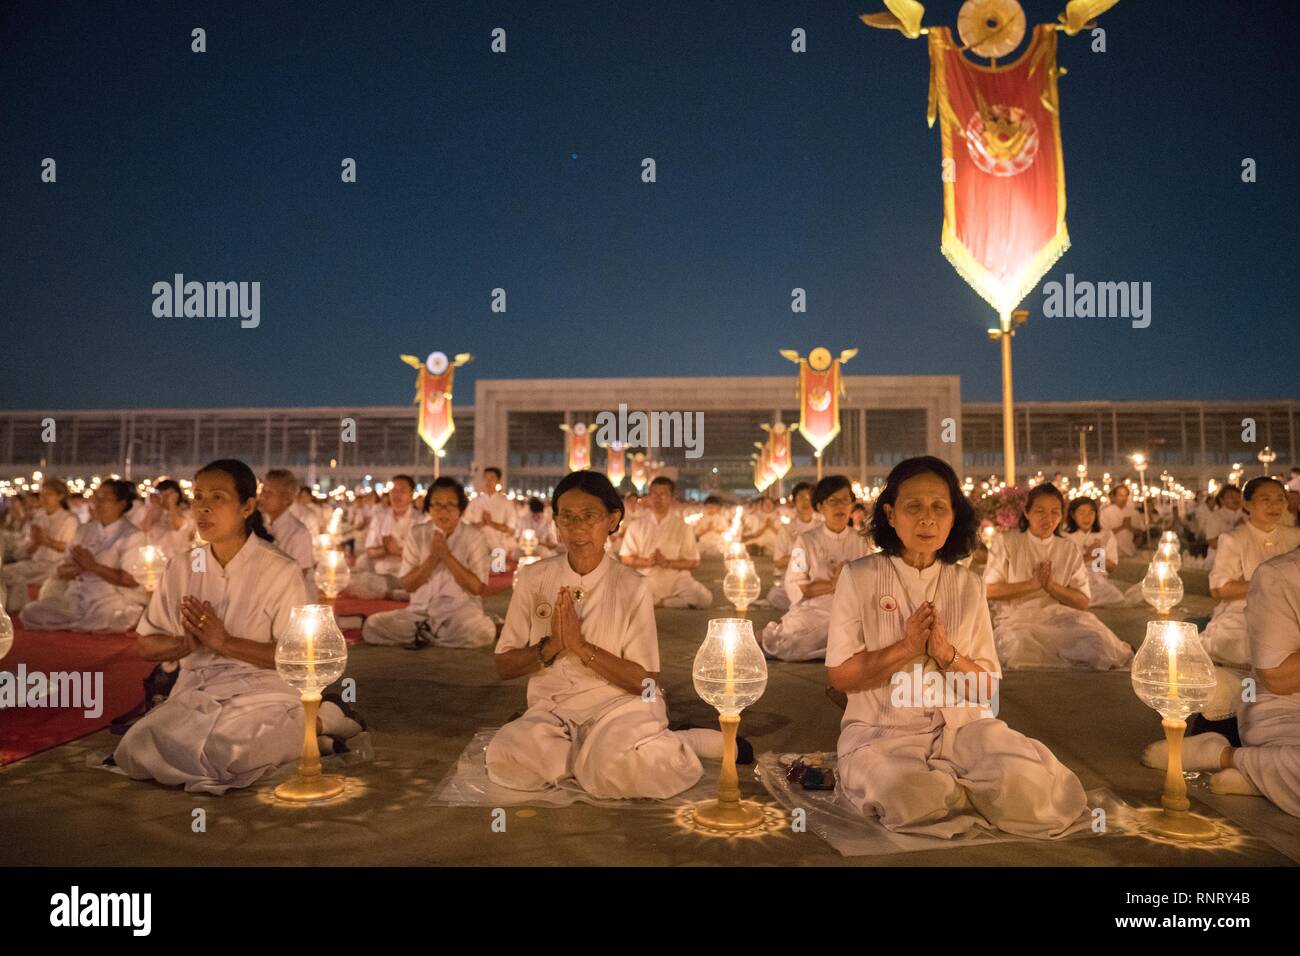 Devotees seen meditating with their lanterns during the yearly Makha Bucha ceremony. Buddhist devotees celebrate the annual festival of Makha Bucha, one of the most important day for buddhists around the world. More than a thousand monks and hundred of thousand devotees were gathering at Dhammakaya Temple in Bangkok to attend the lighting ceremony. Stock Photo